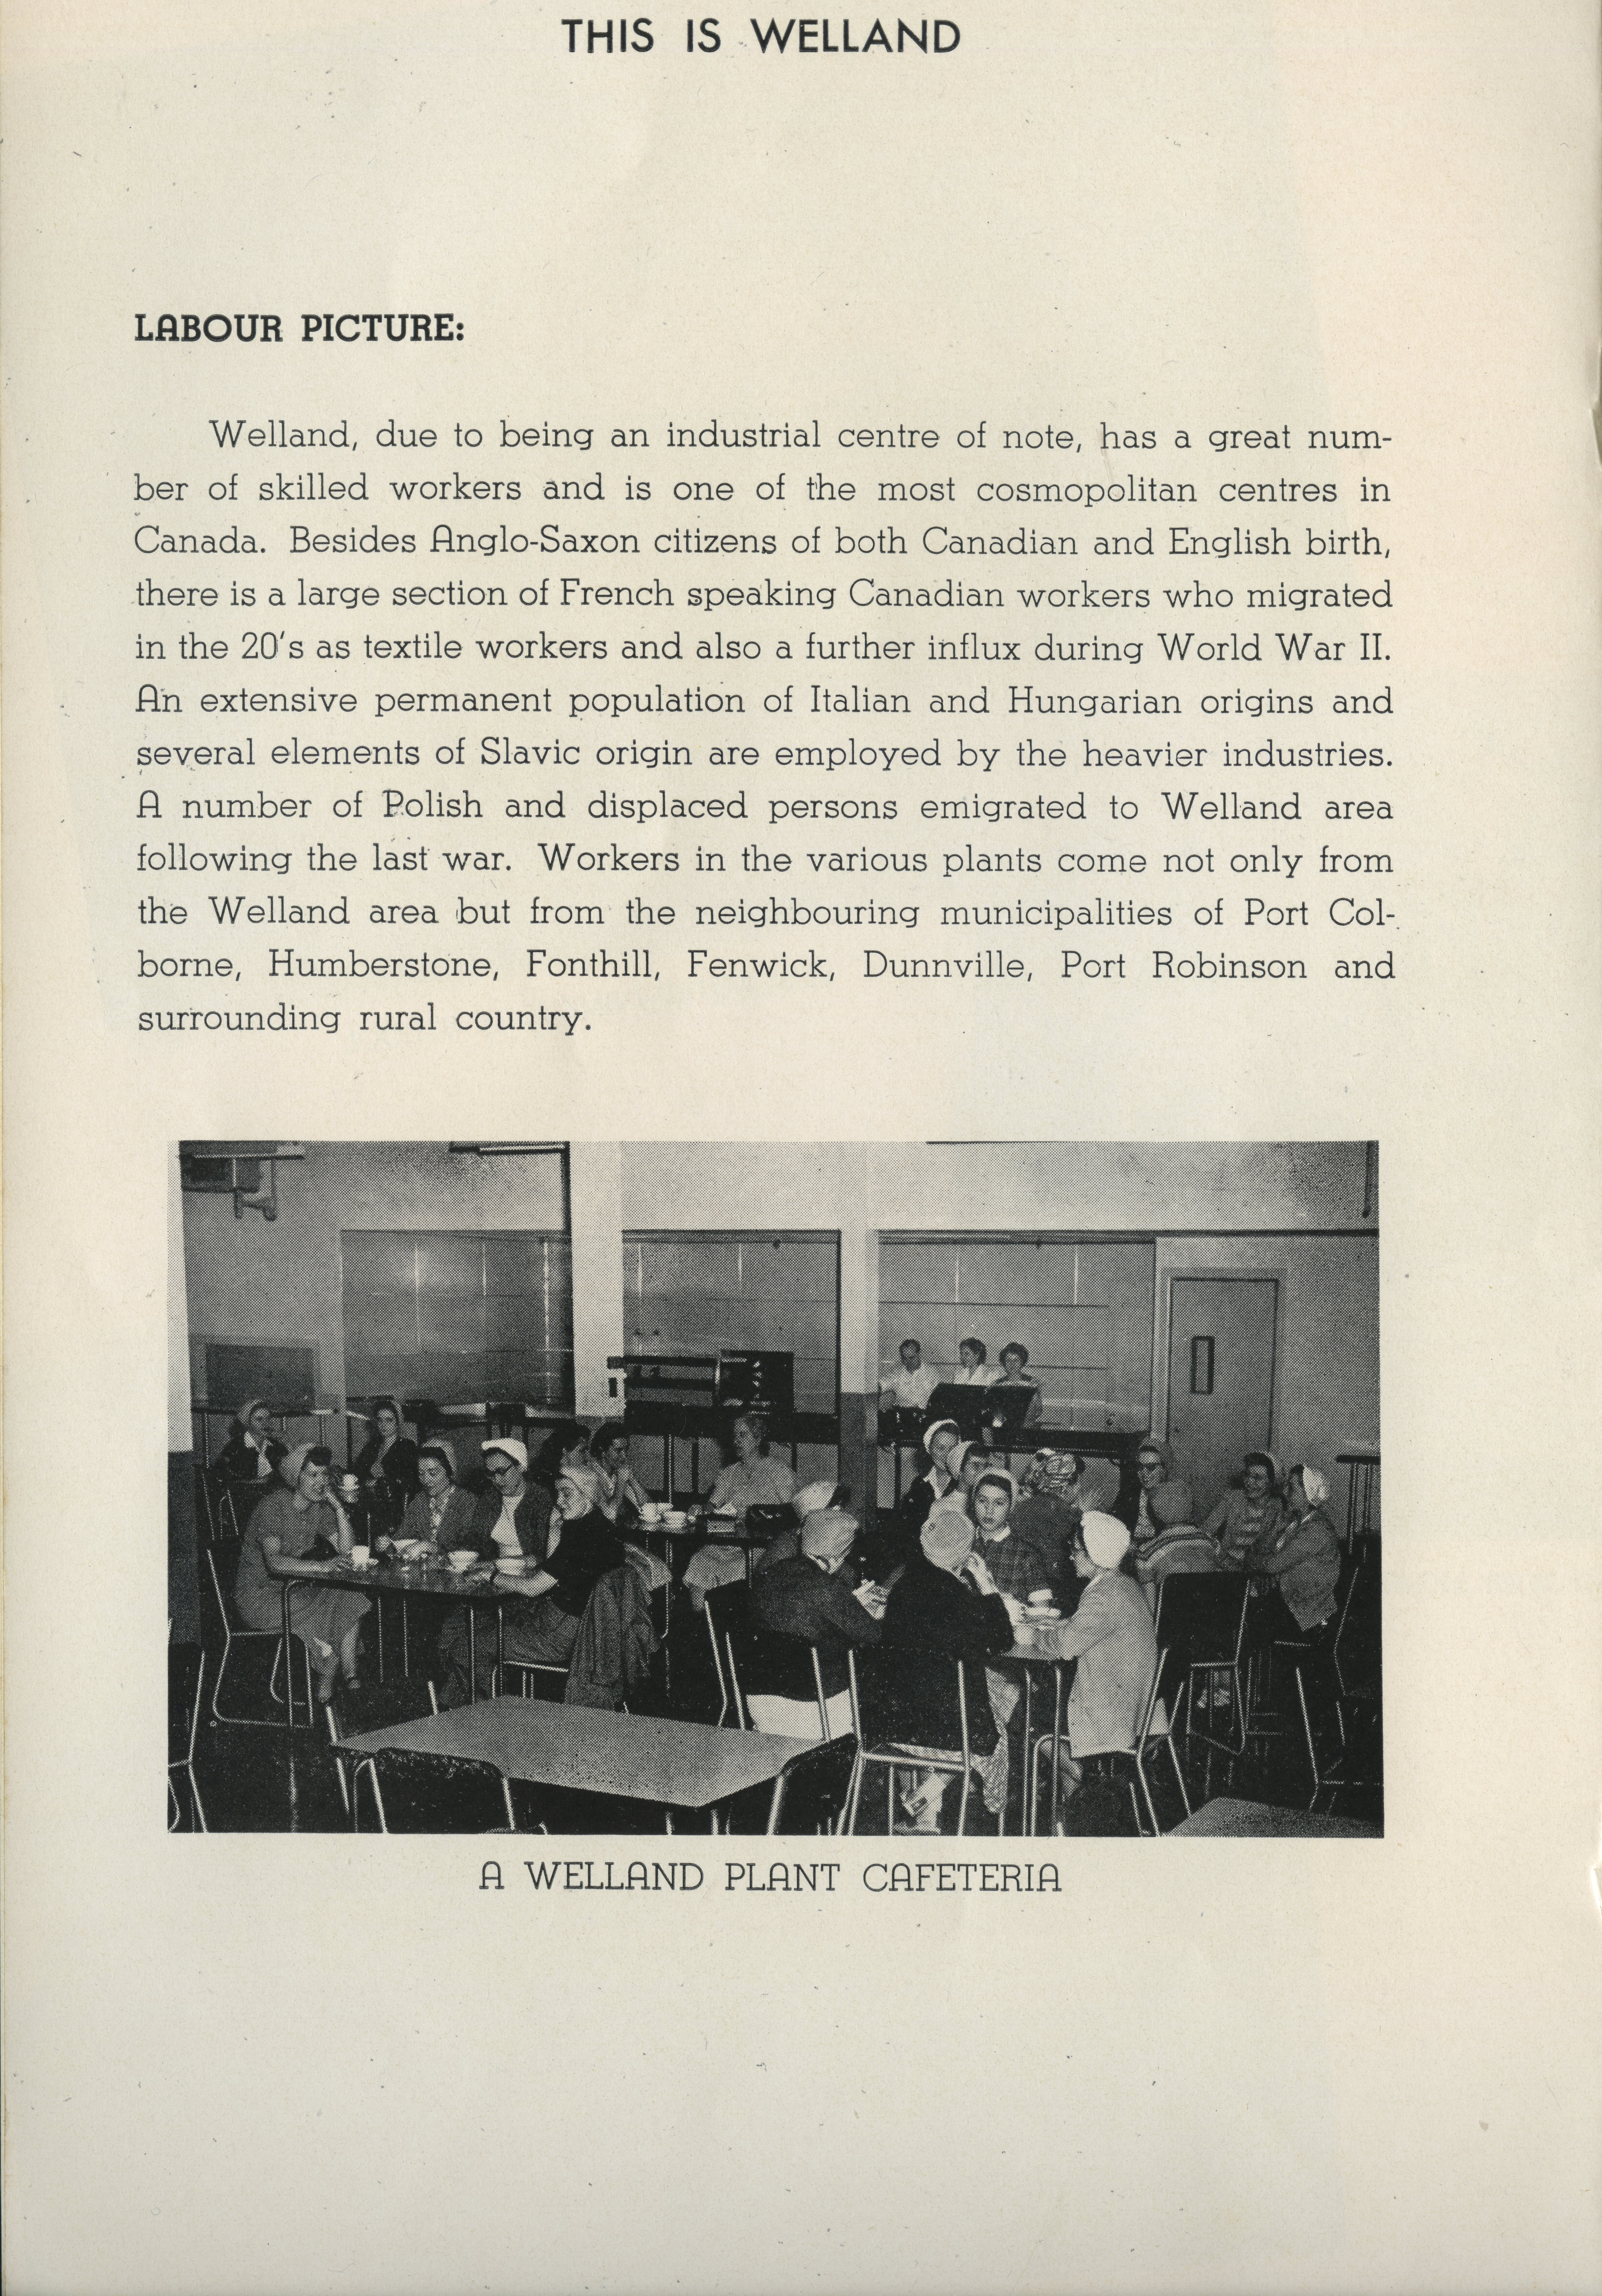 A page of a promotional brochure. There is a black and white picture of women in a cafeteria, wearing old fashioned dresses and head coverings.